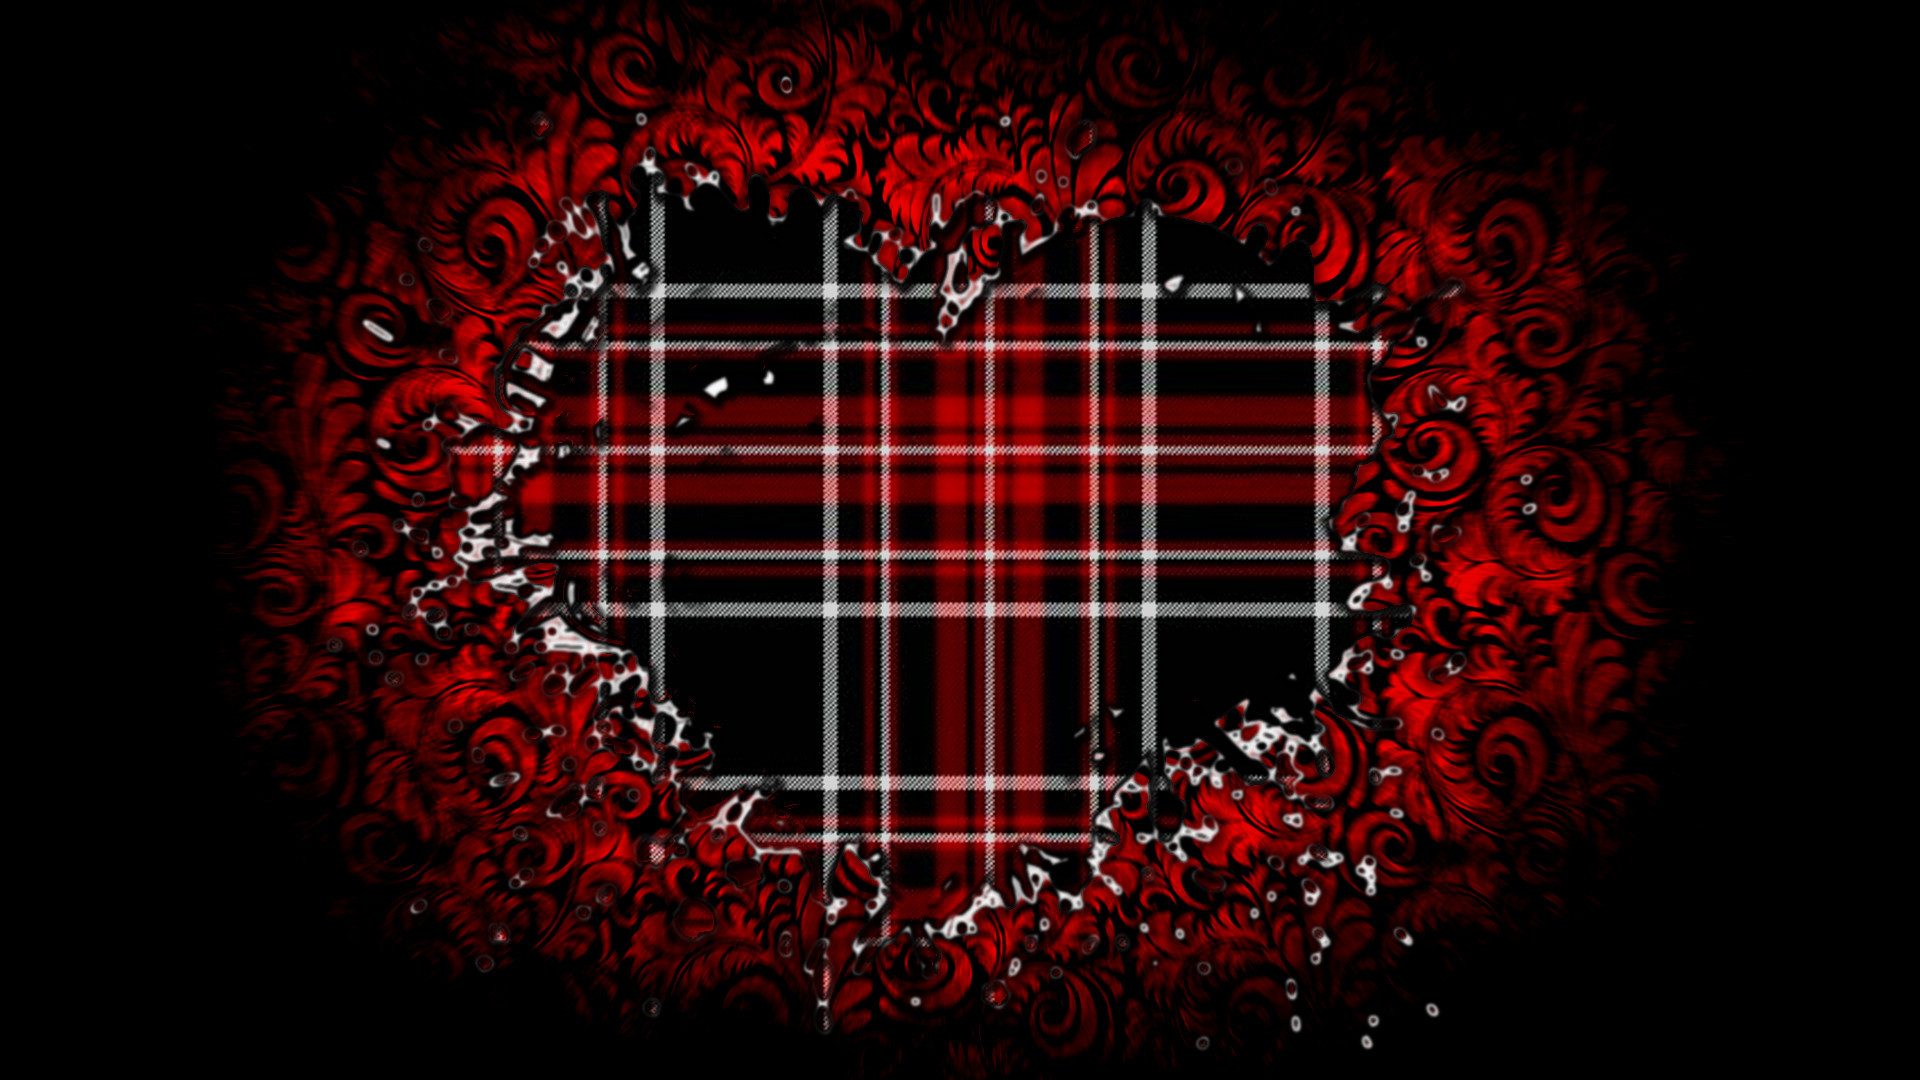 1920x1080 ... Black and Red Plaid Heart Wallpaper by RoulettesPlay